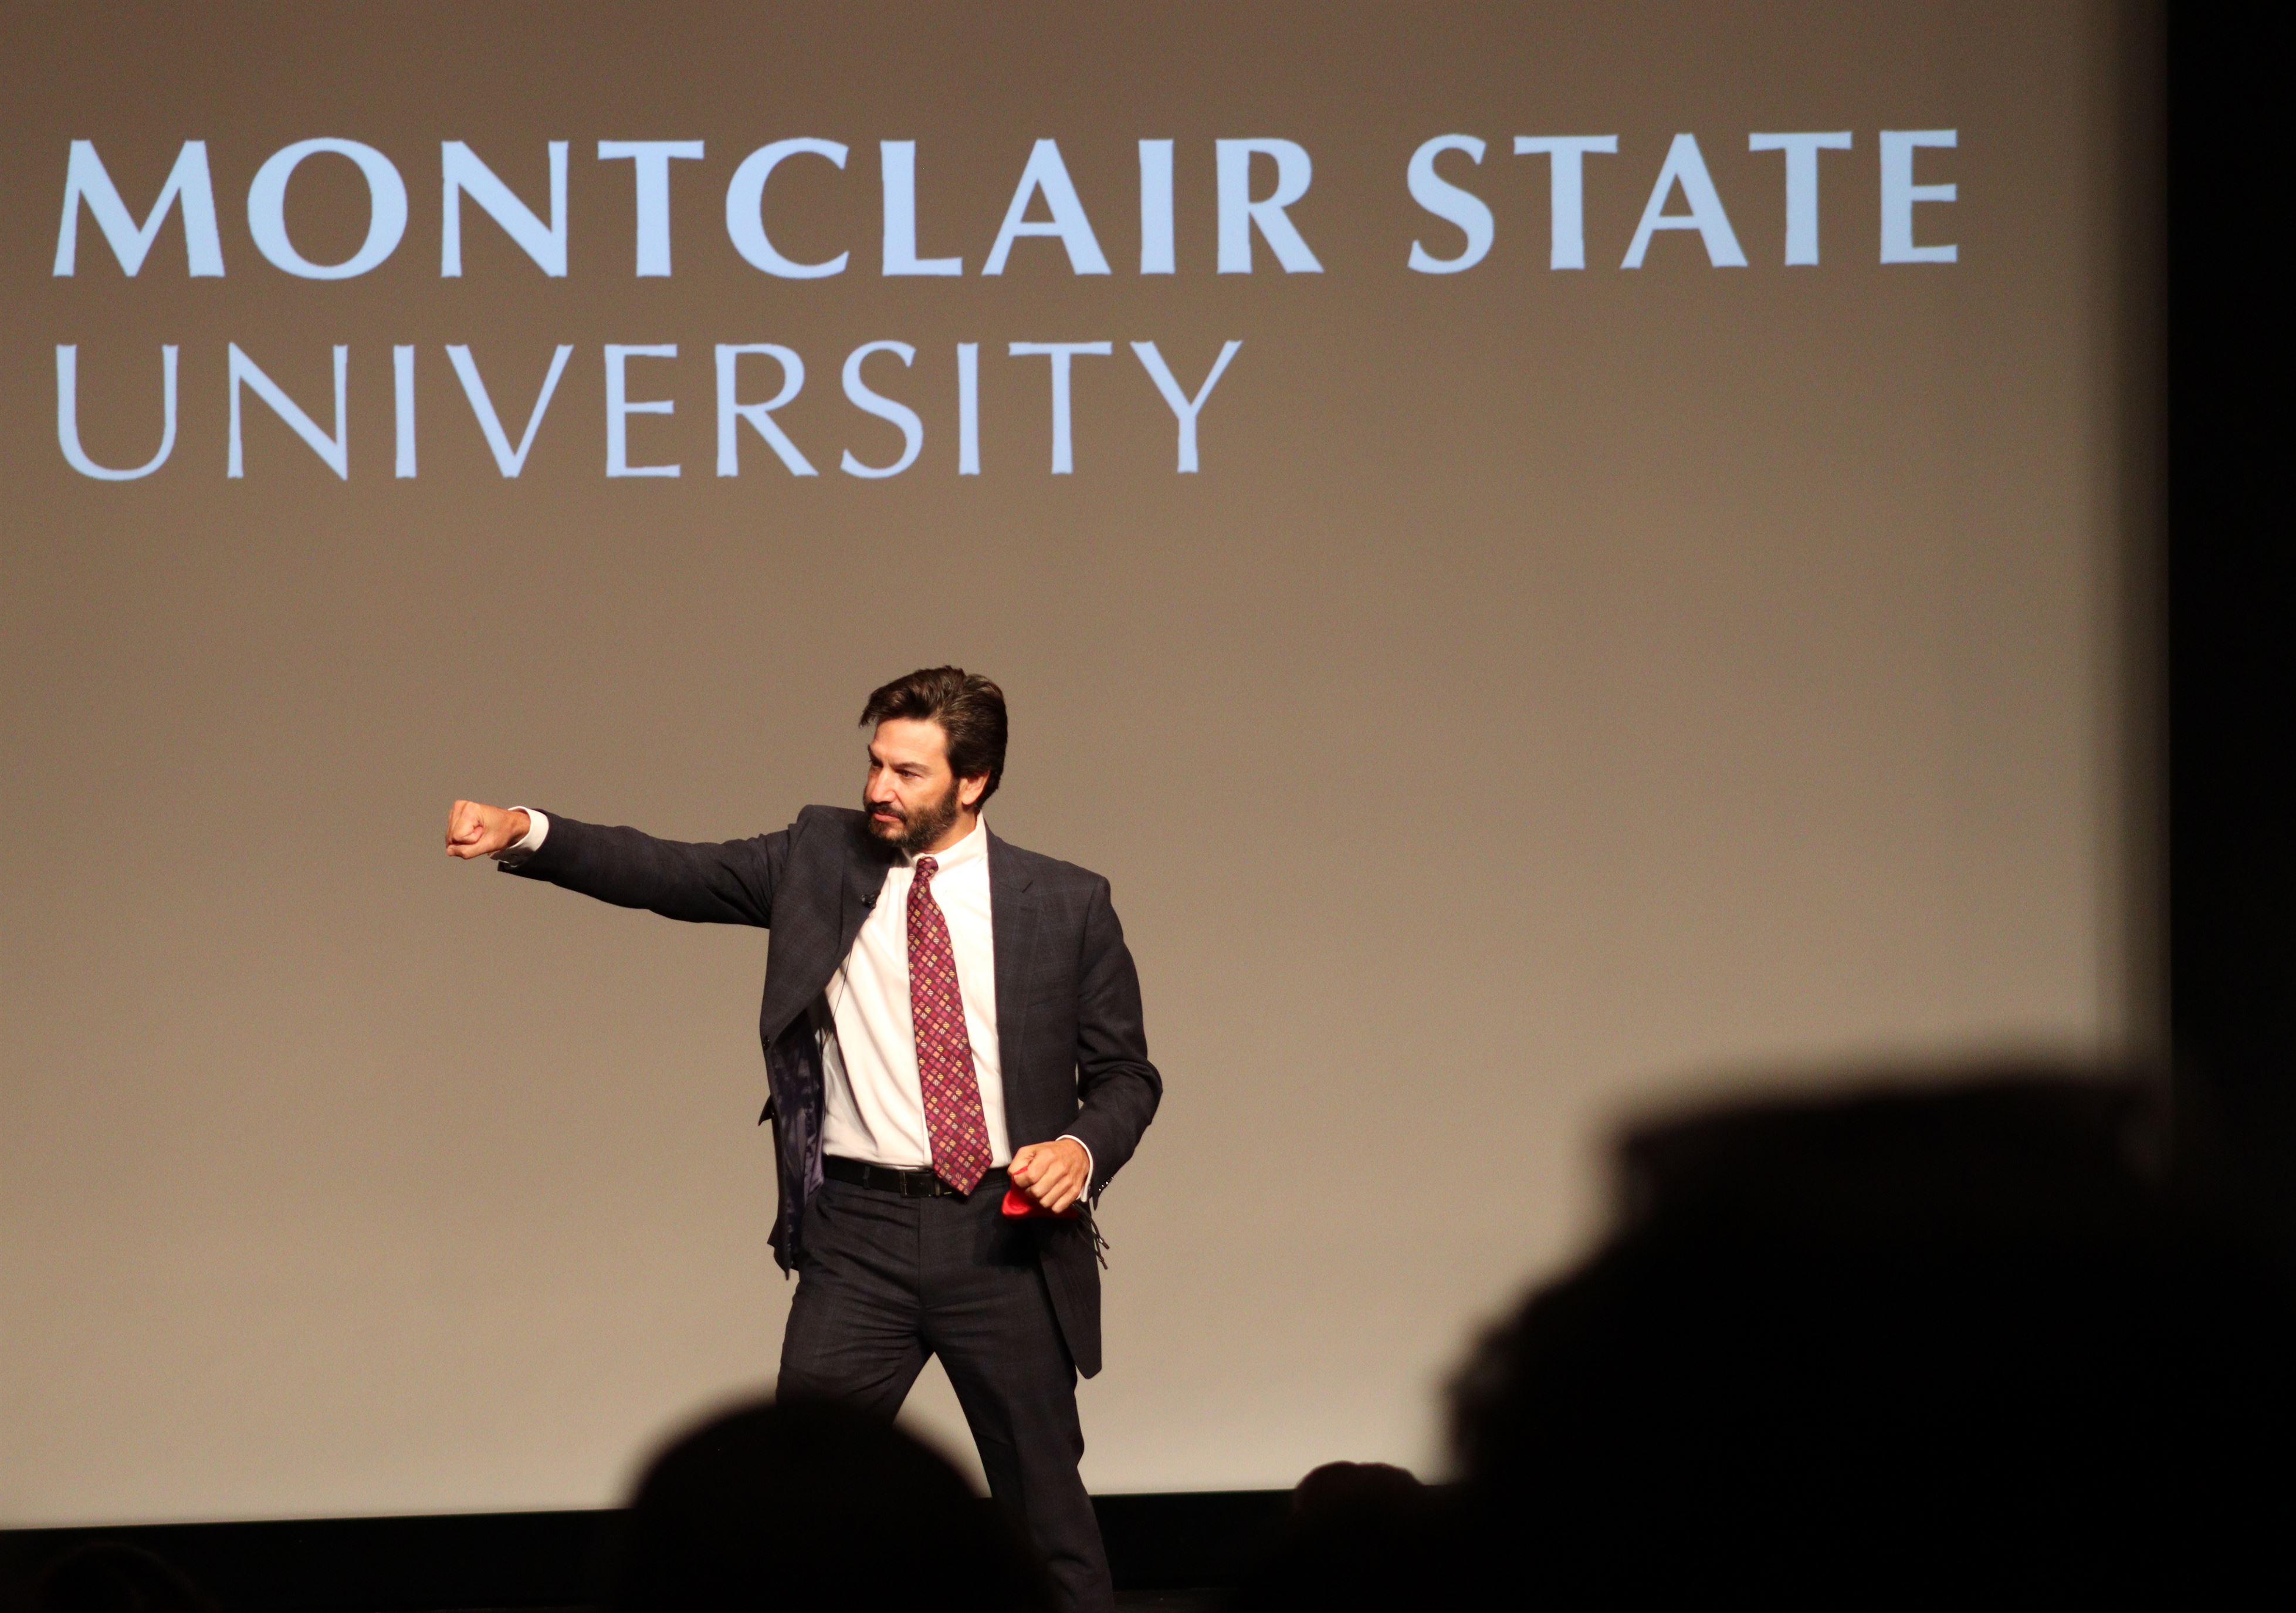 President Johnathan Koppel made his entrance with cheer from the crowd. John LaRosa | The Montclarion